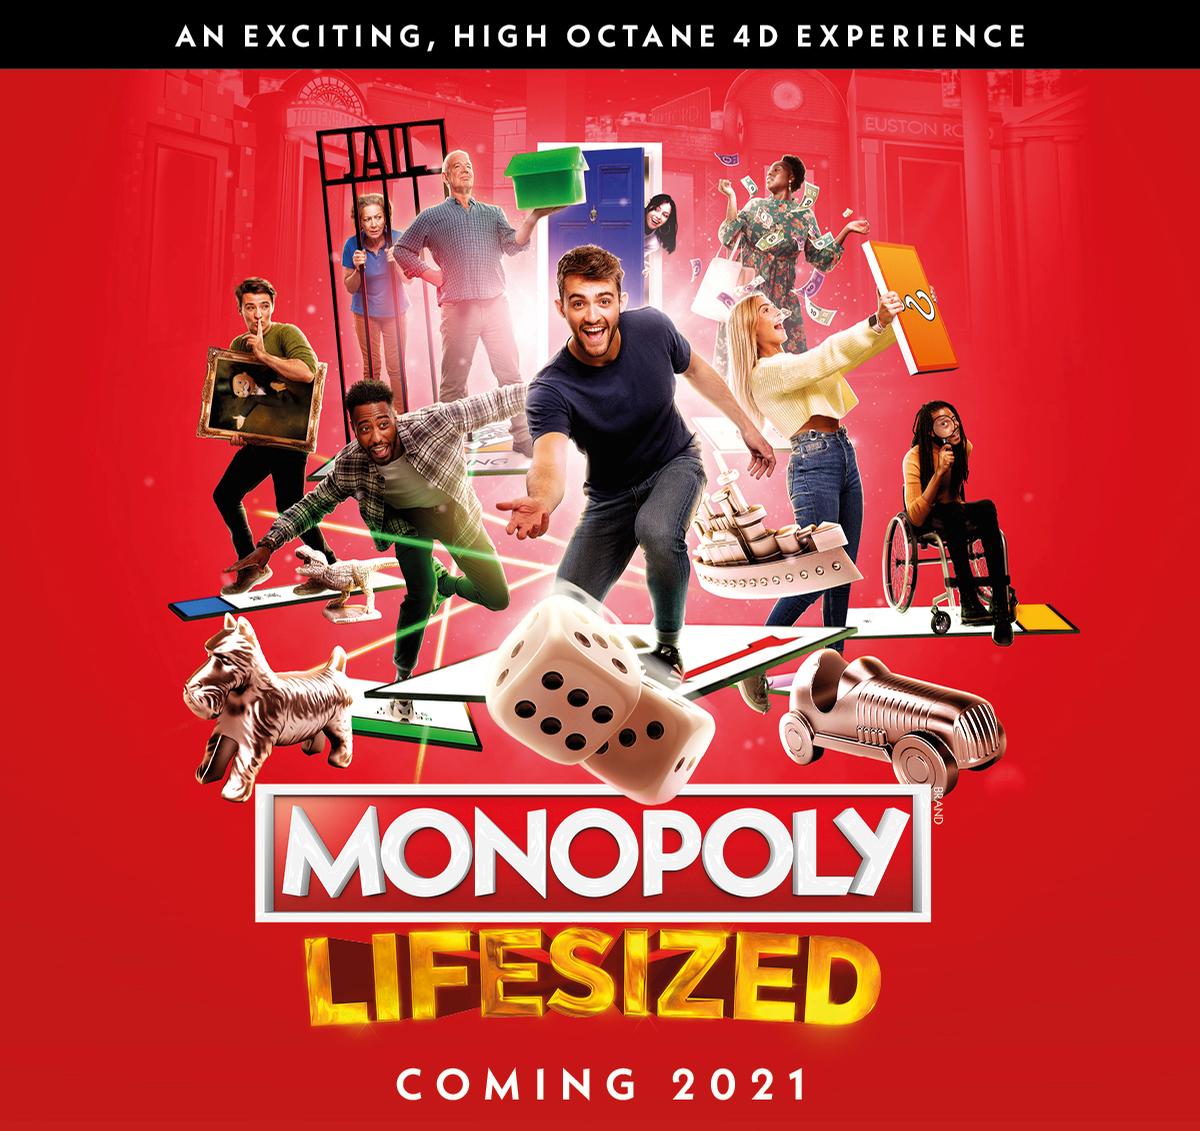 Monopoly Lifesized will consist of a 75-minute gameplay segment on a 15 x 15m board / Hasbro/Selladoor Worldwide/Gamepath